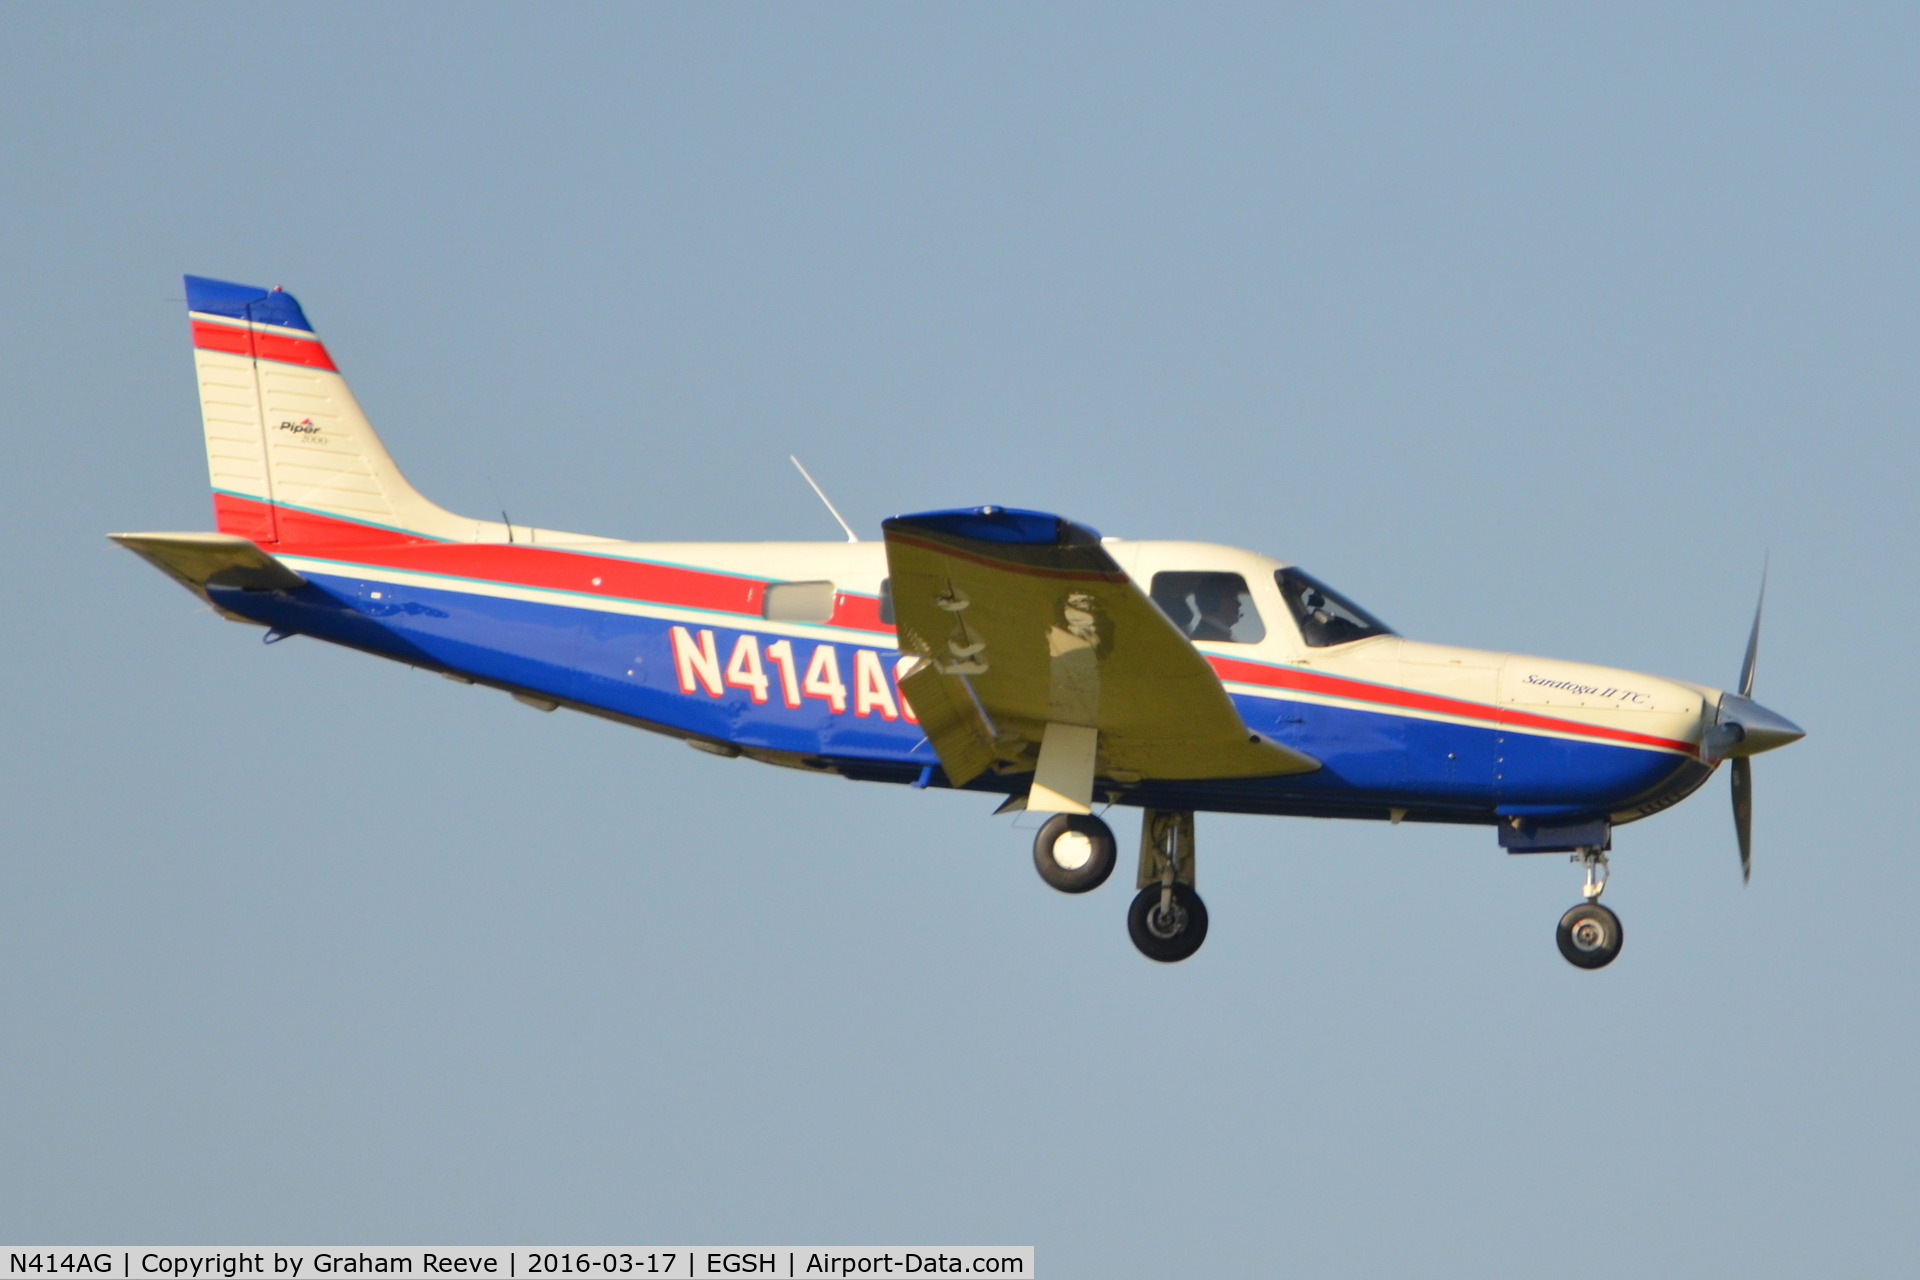 N414AG, 2000 Piper PA-32R-301T Turbo Saratoga C/N 3257184, Landing at Norwich.